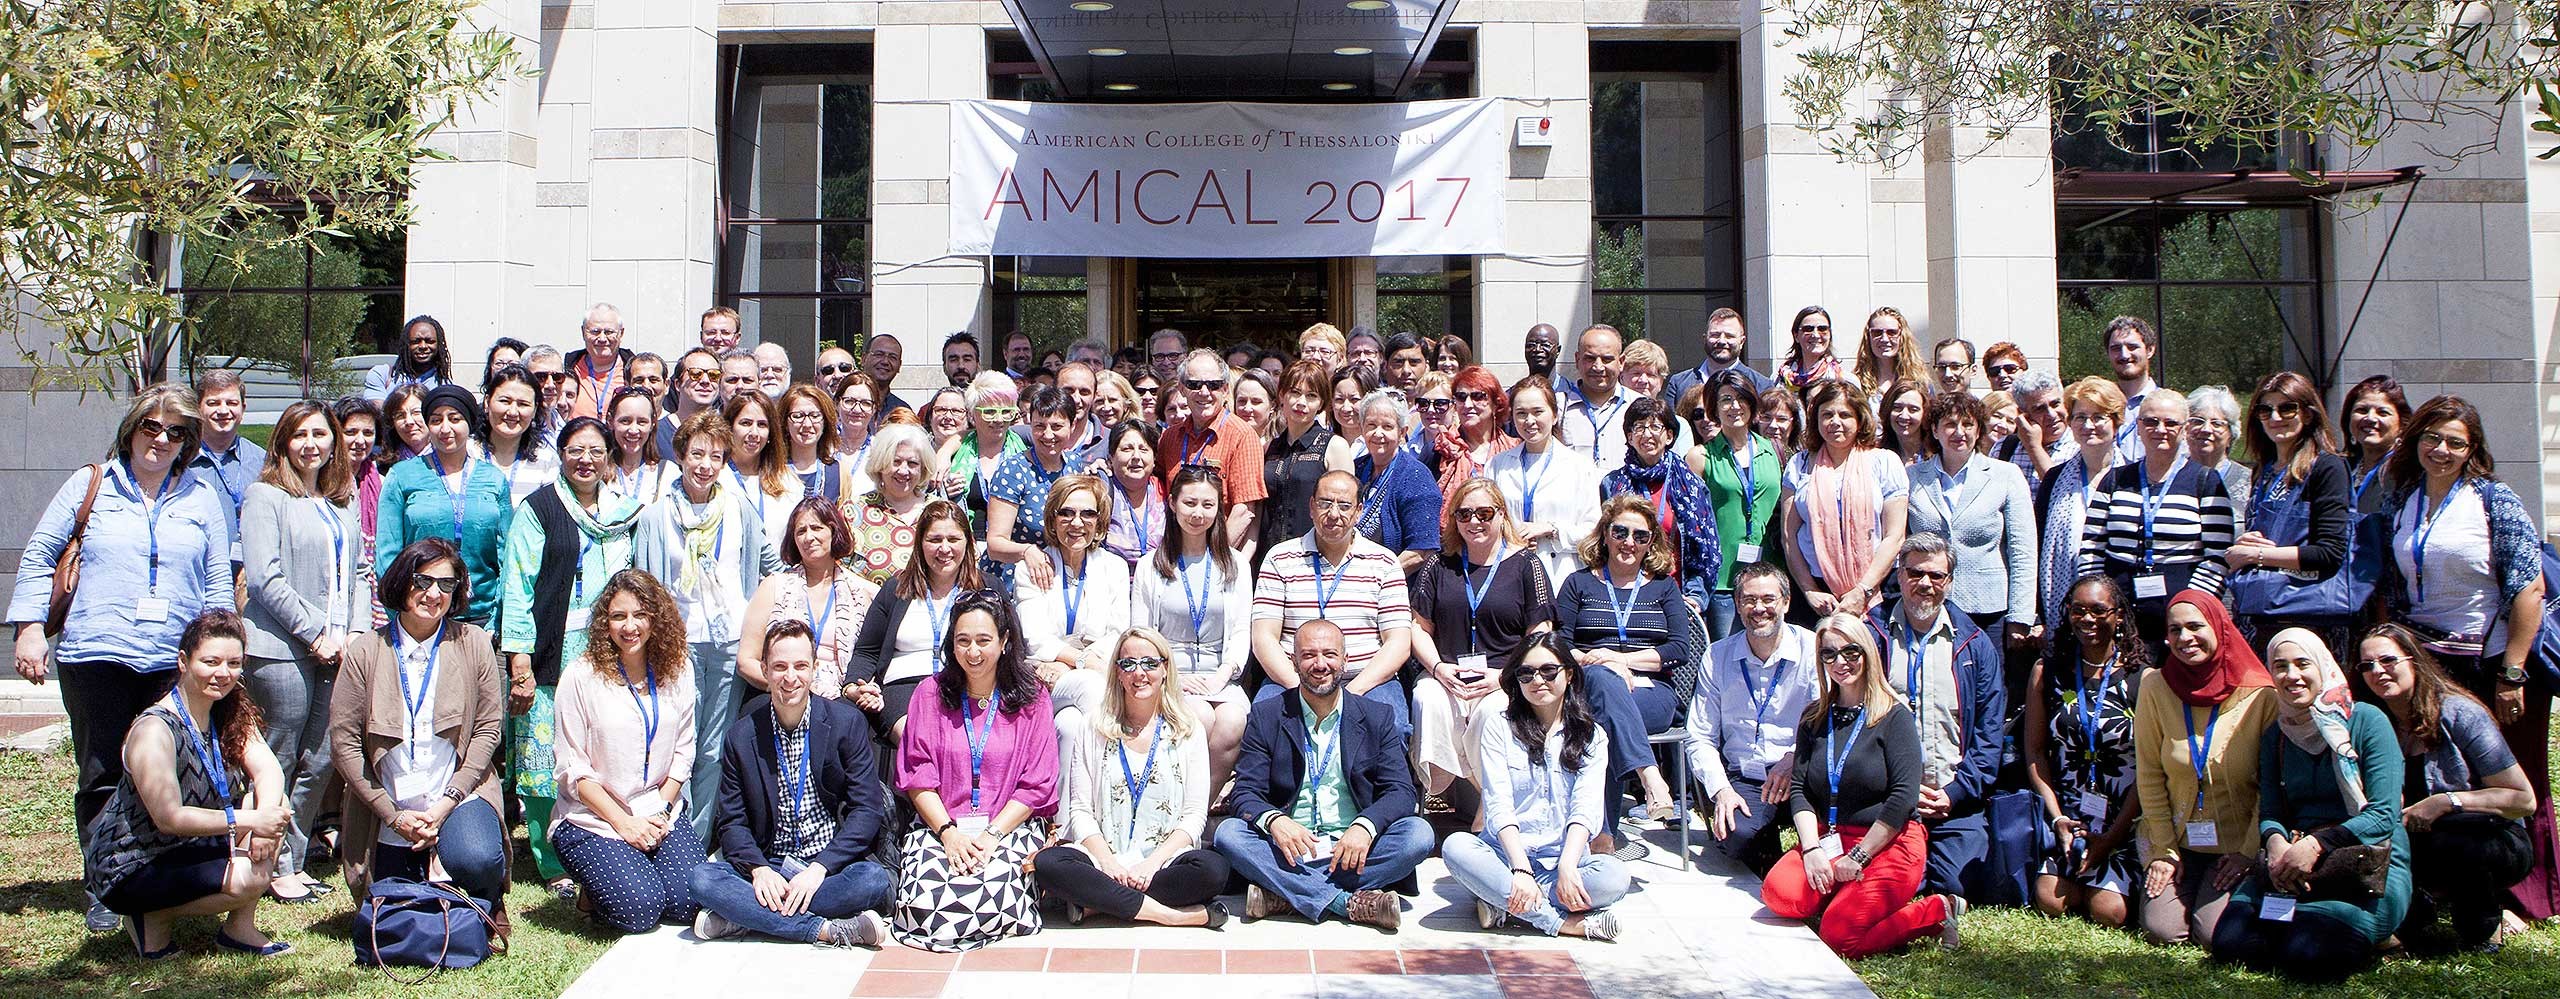 Group photo from AMICAL 2017.